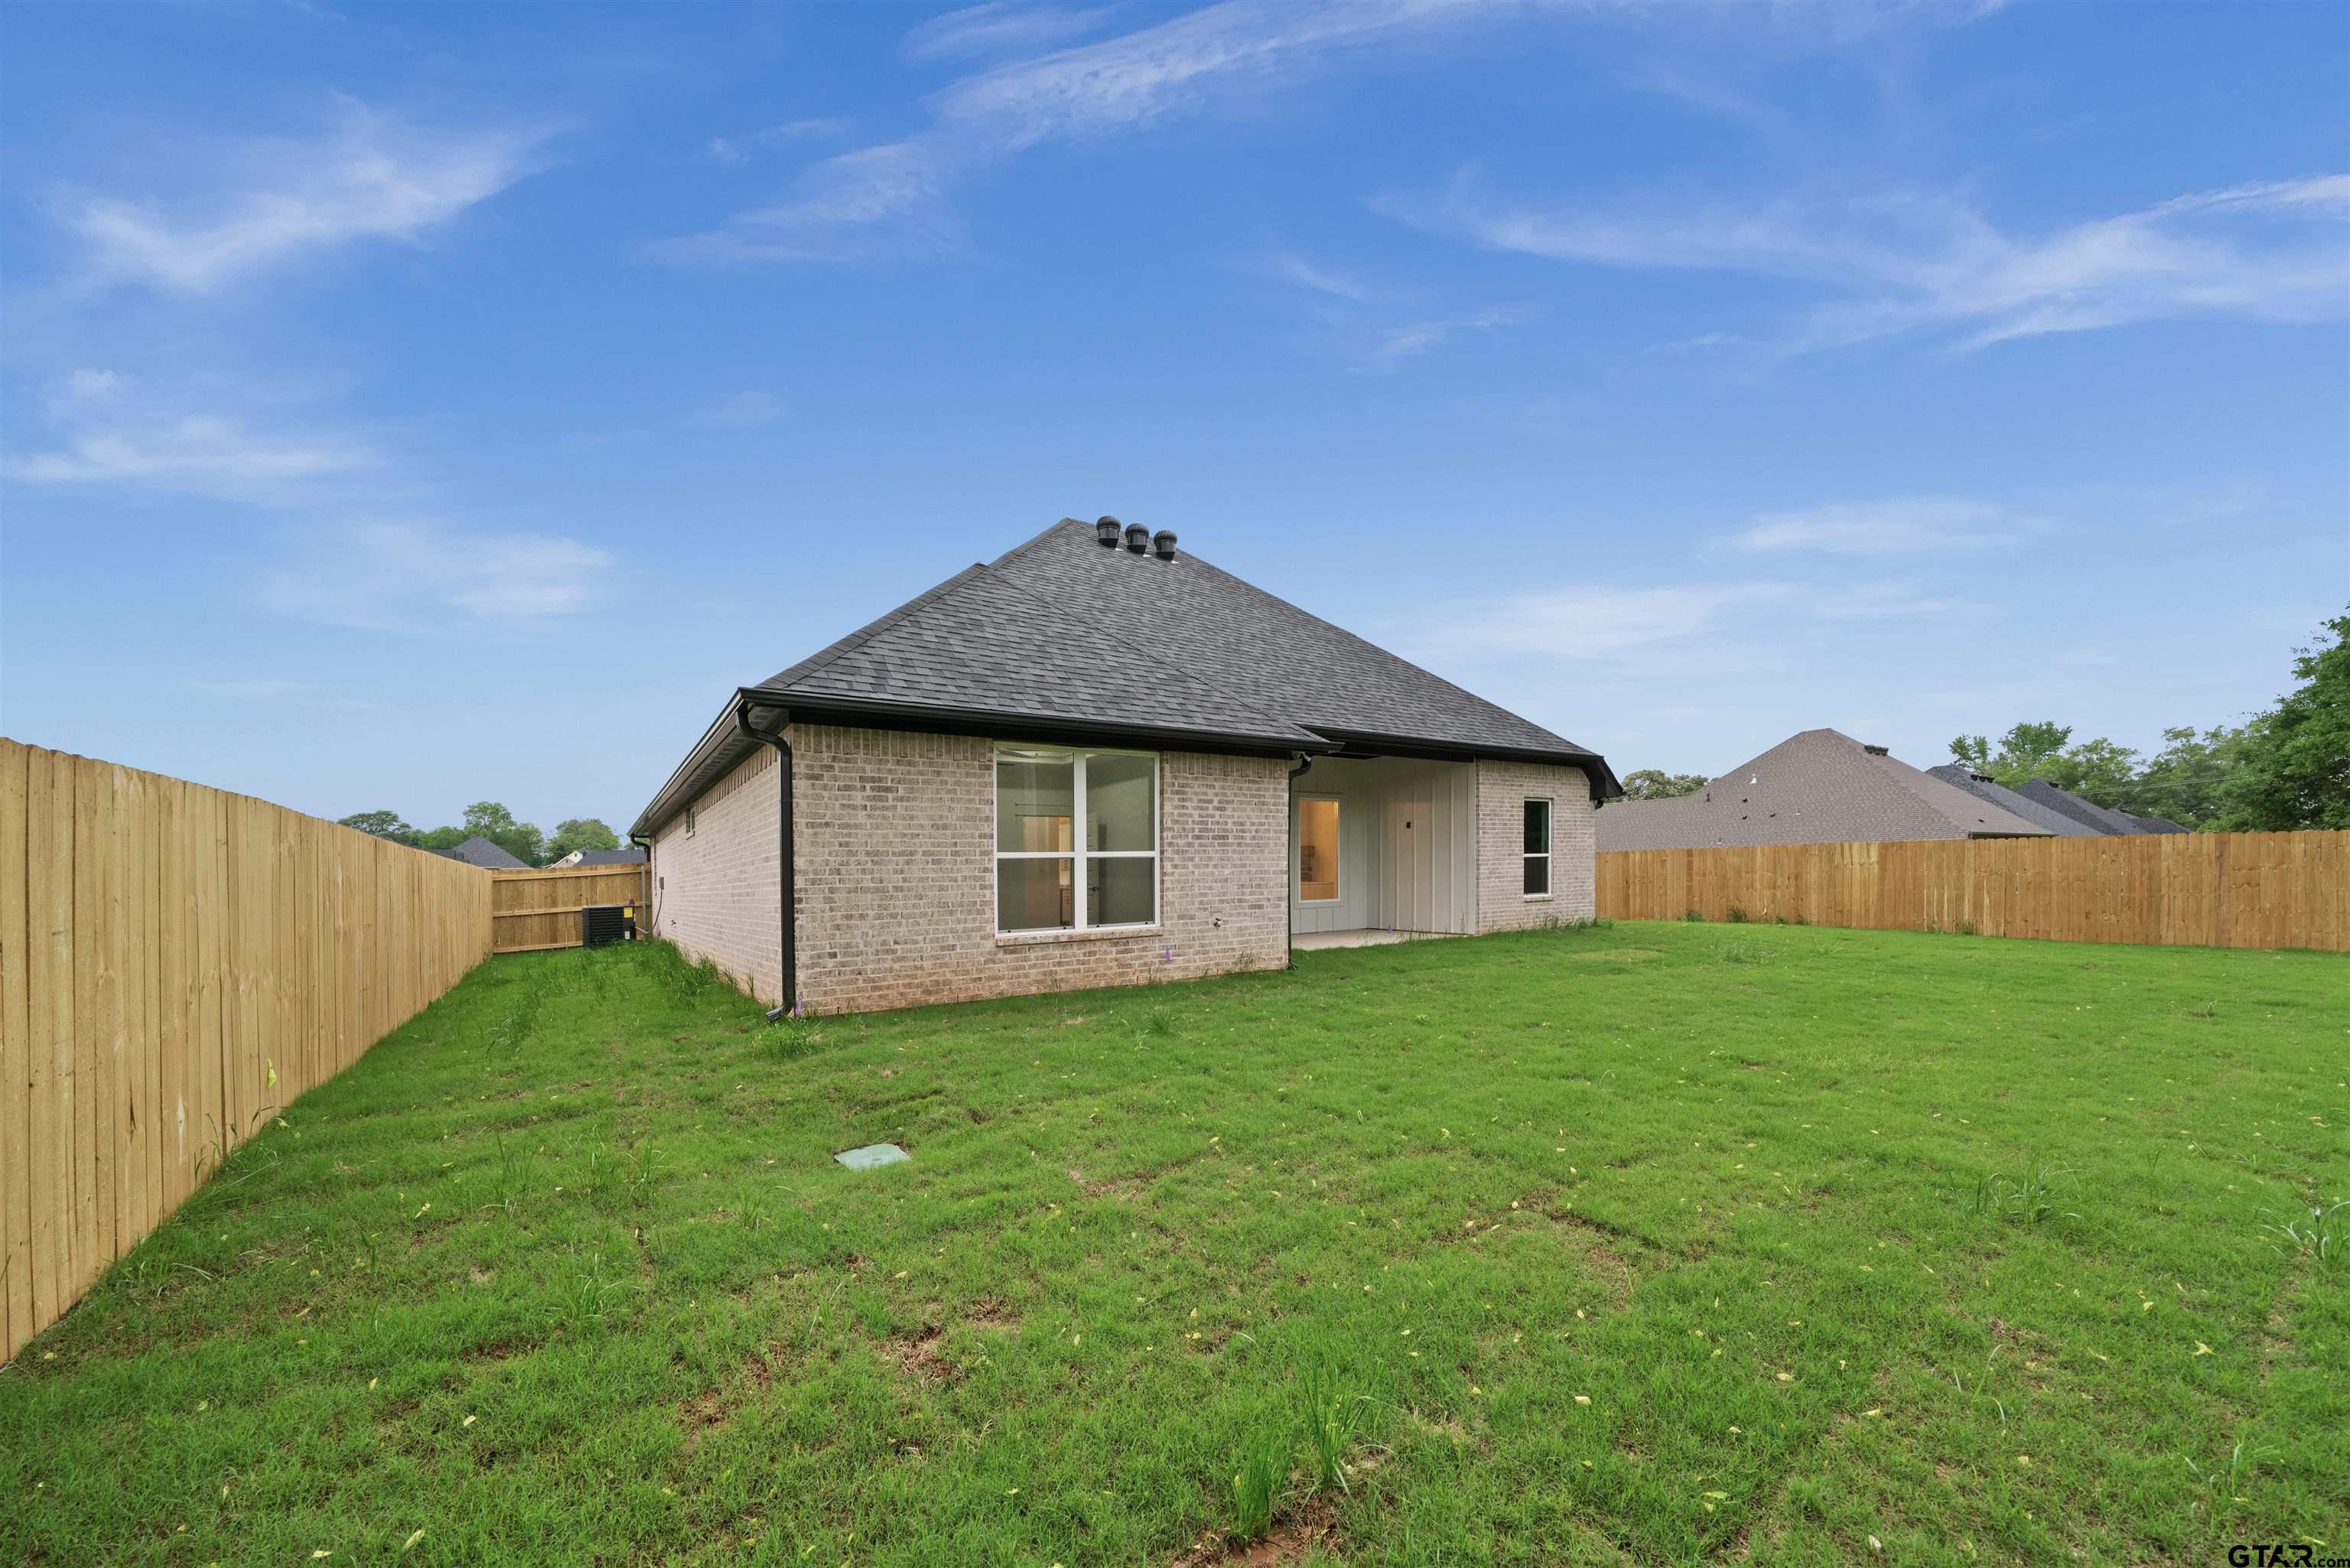 813 Redwing Way, Whitehouse, Texas 75791, 4 Bedrooms Bedrooms, ,2 BathroomsBathrooms,Single Family Detached,For Sale,Redwing Way,24005818